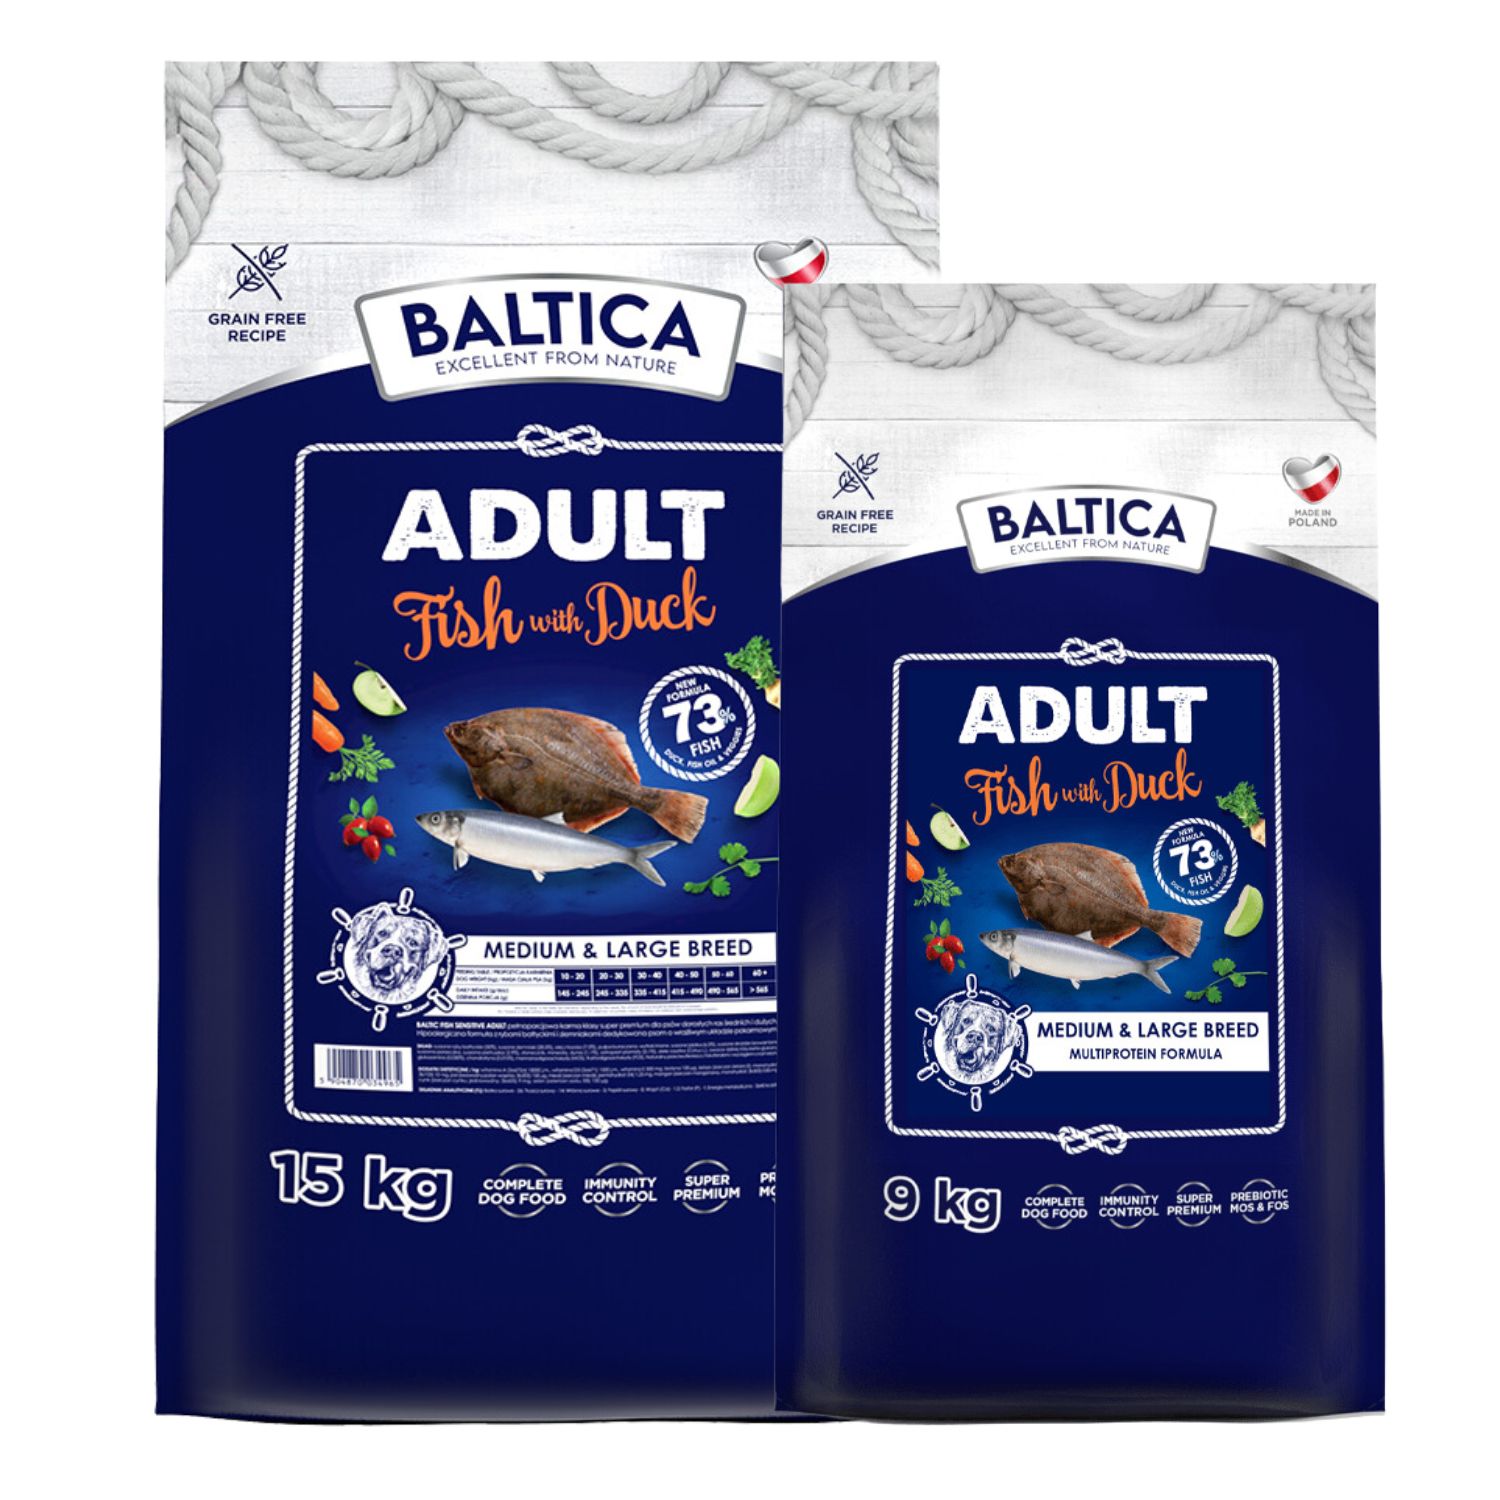 Baltica Adult Baltic Fish with Duck M/L